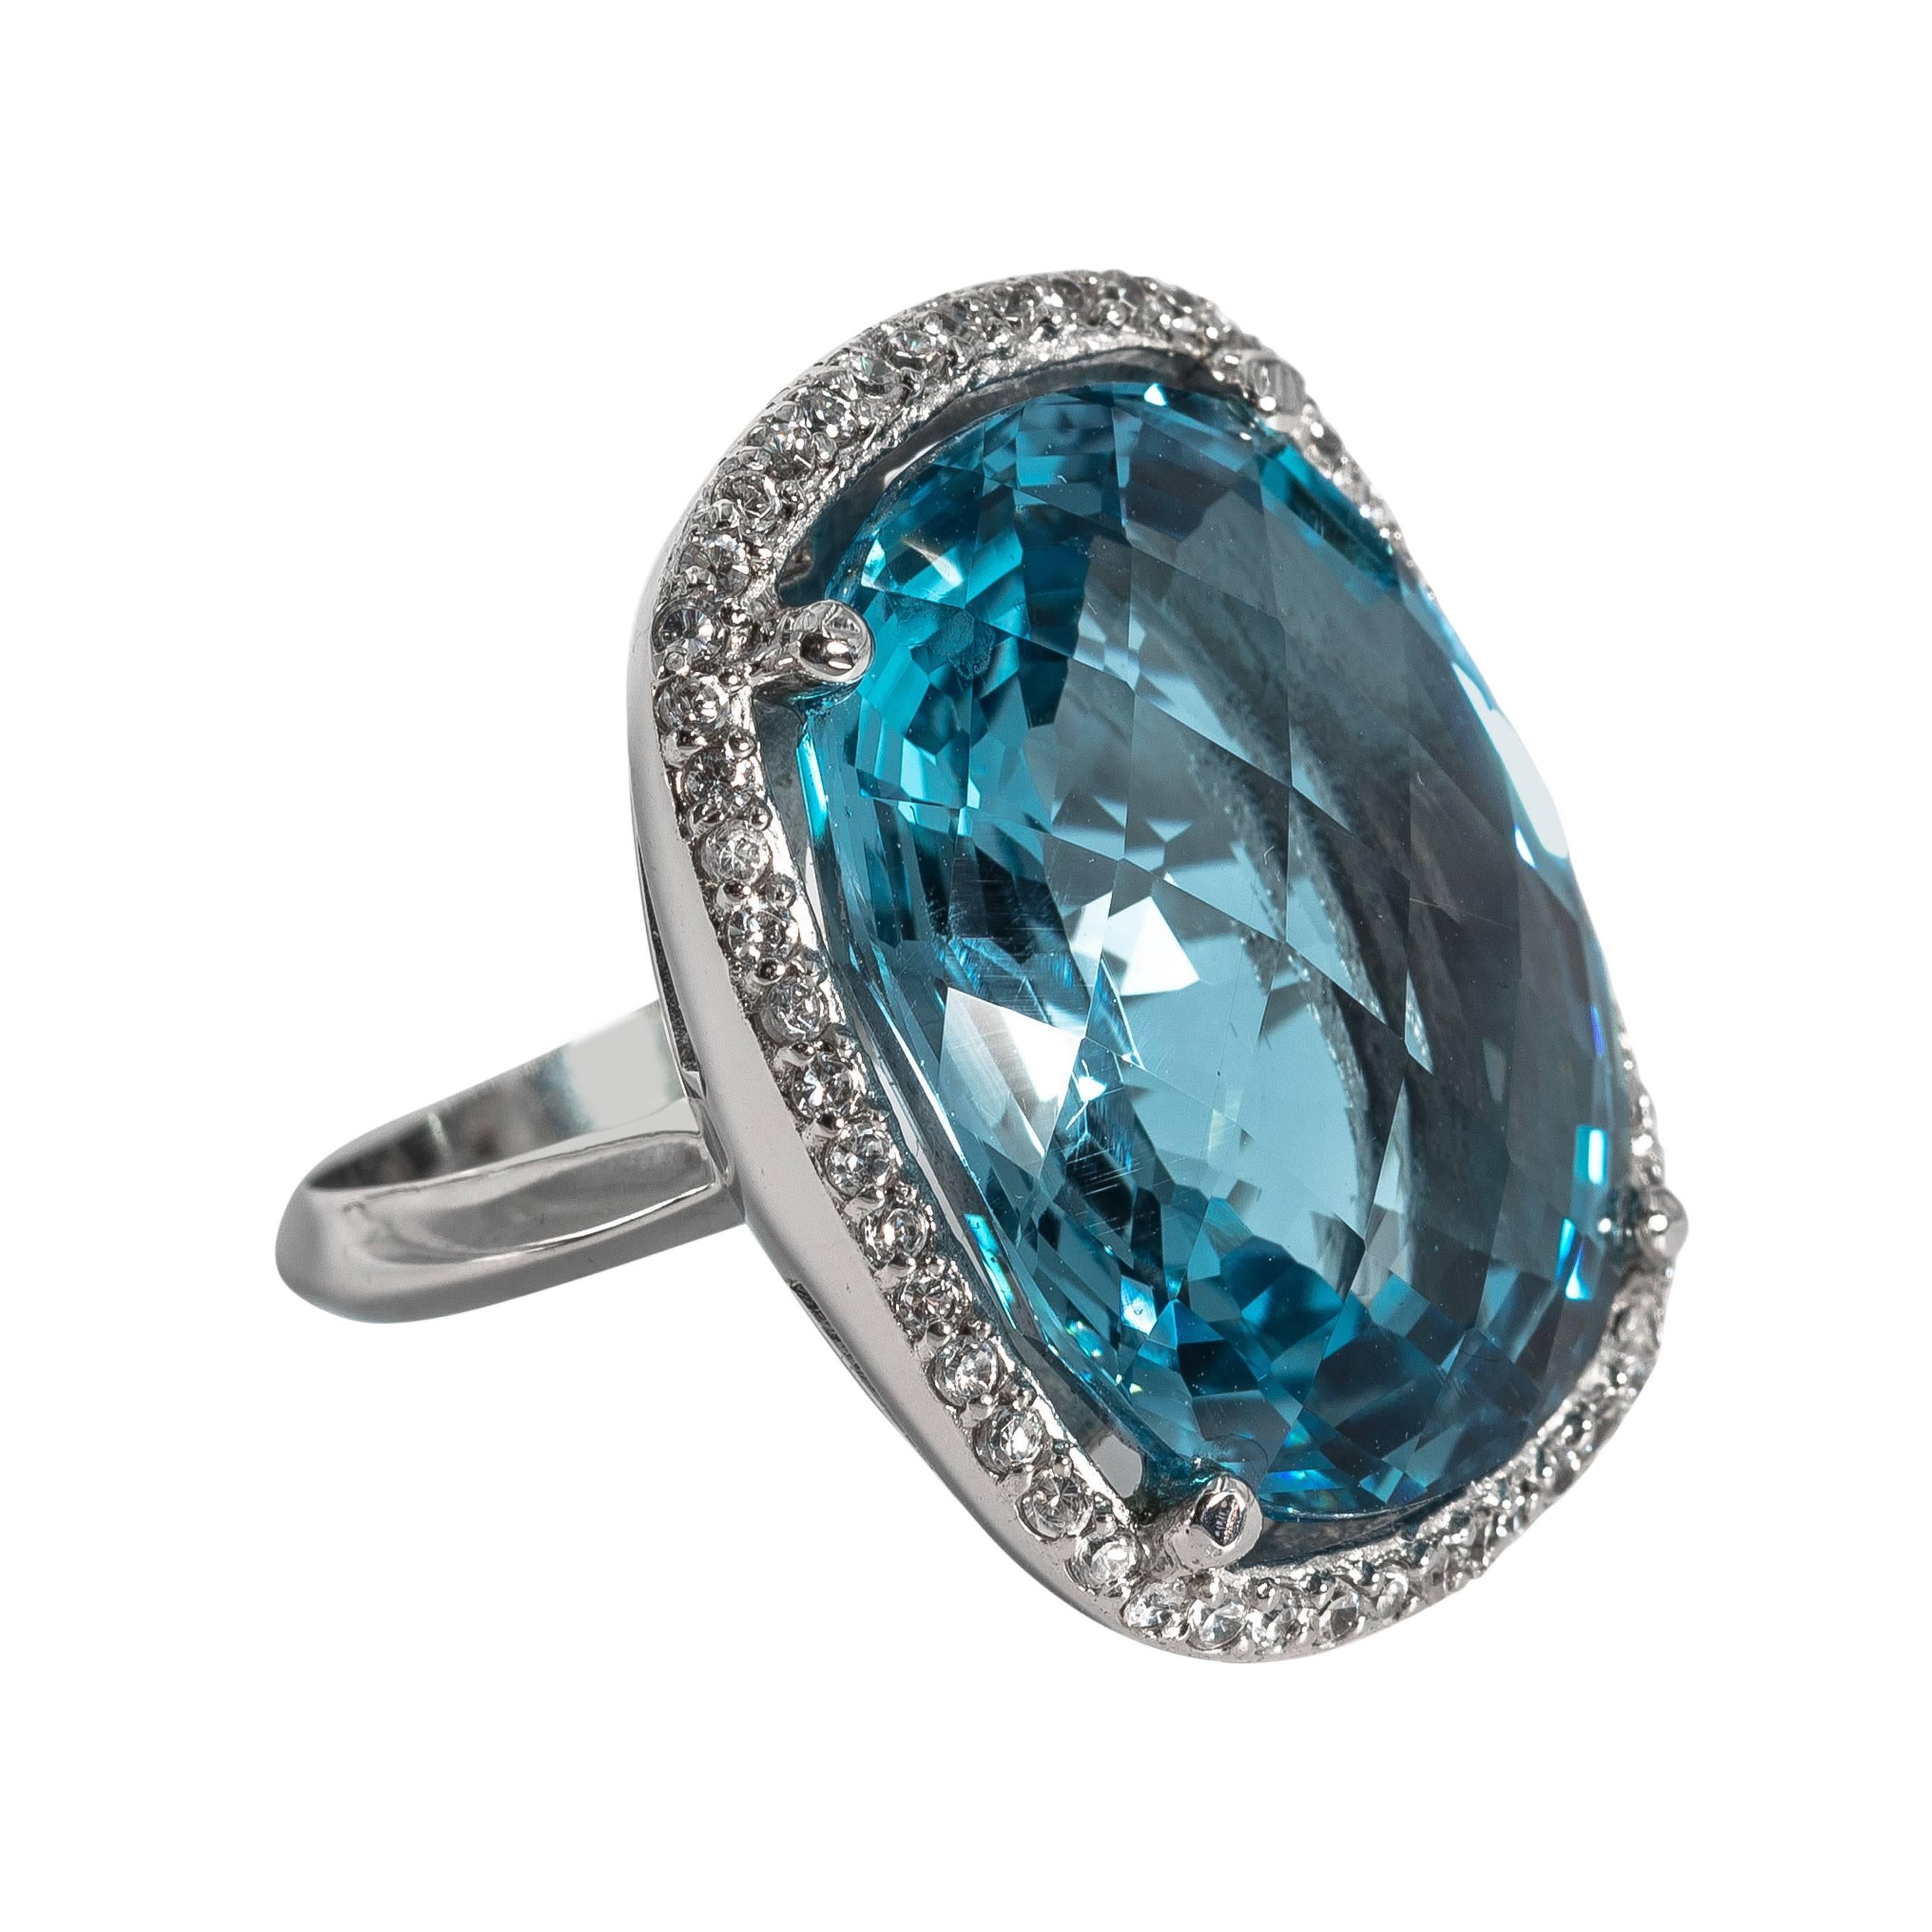 Chic Swiss Blue Faceted Topaz Faux Diamond Cocktail Ring